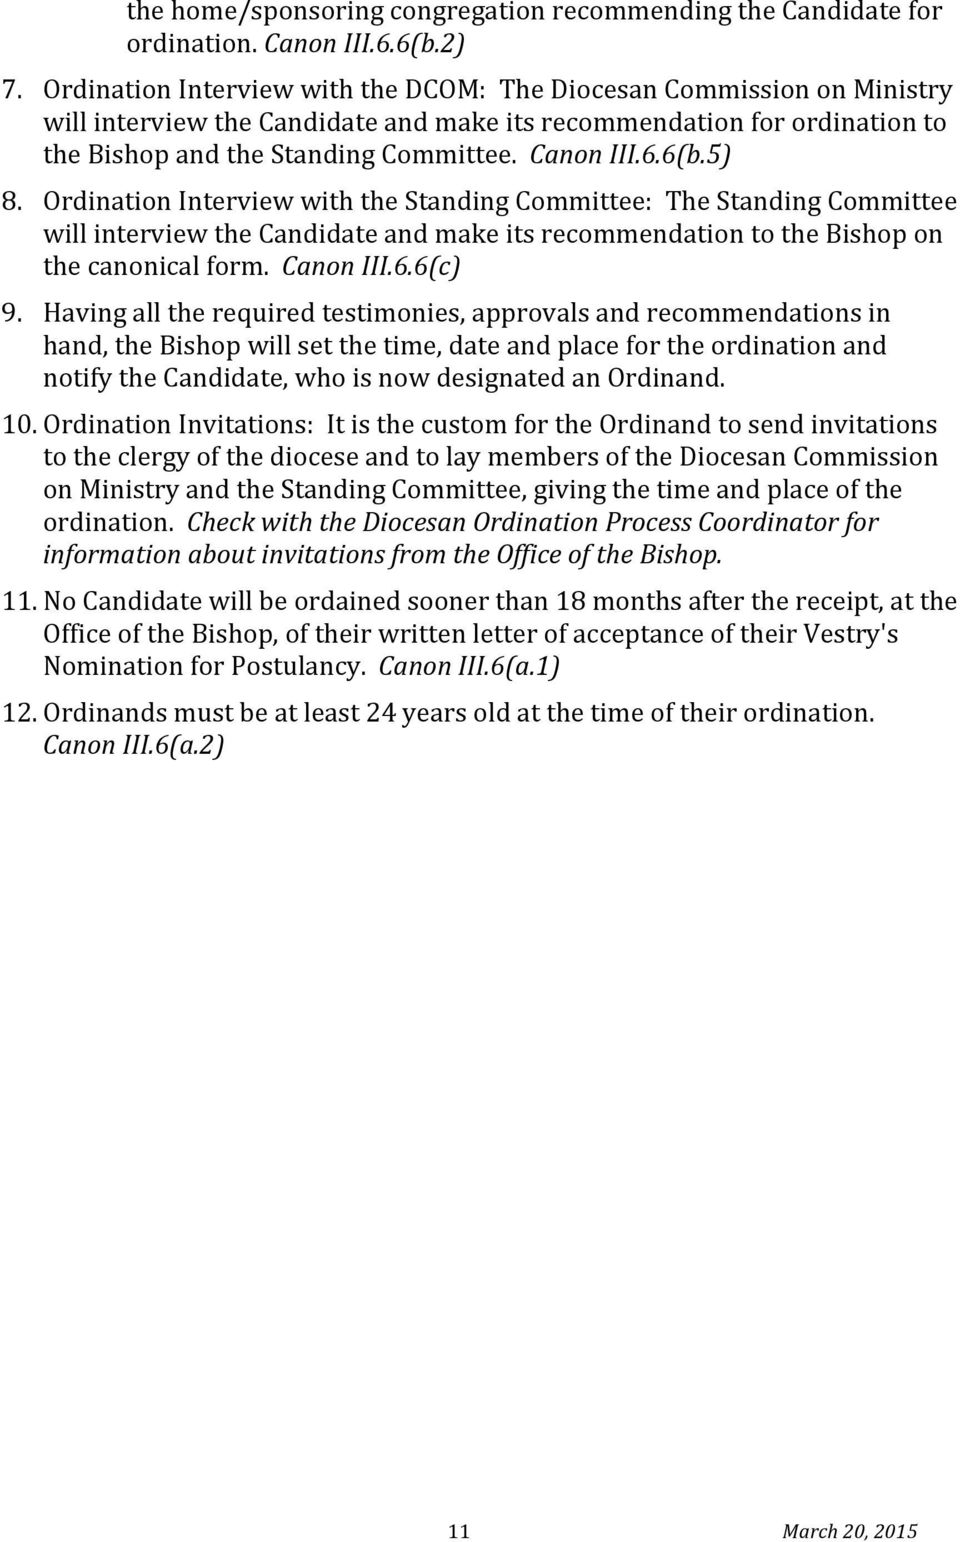 6(b.5) 8. Ordination Interview with the Standing Committee: The Standing Committee will interview the Candidate and make its recommendation to the Bishop on the canonical form. Canon III.6.6(c) 9.